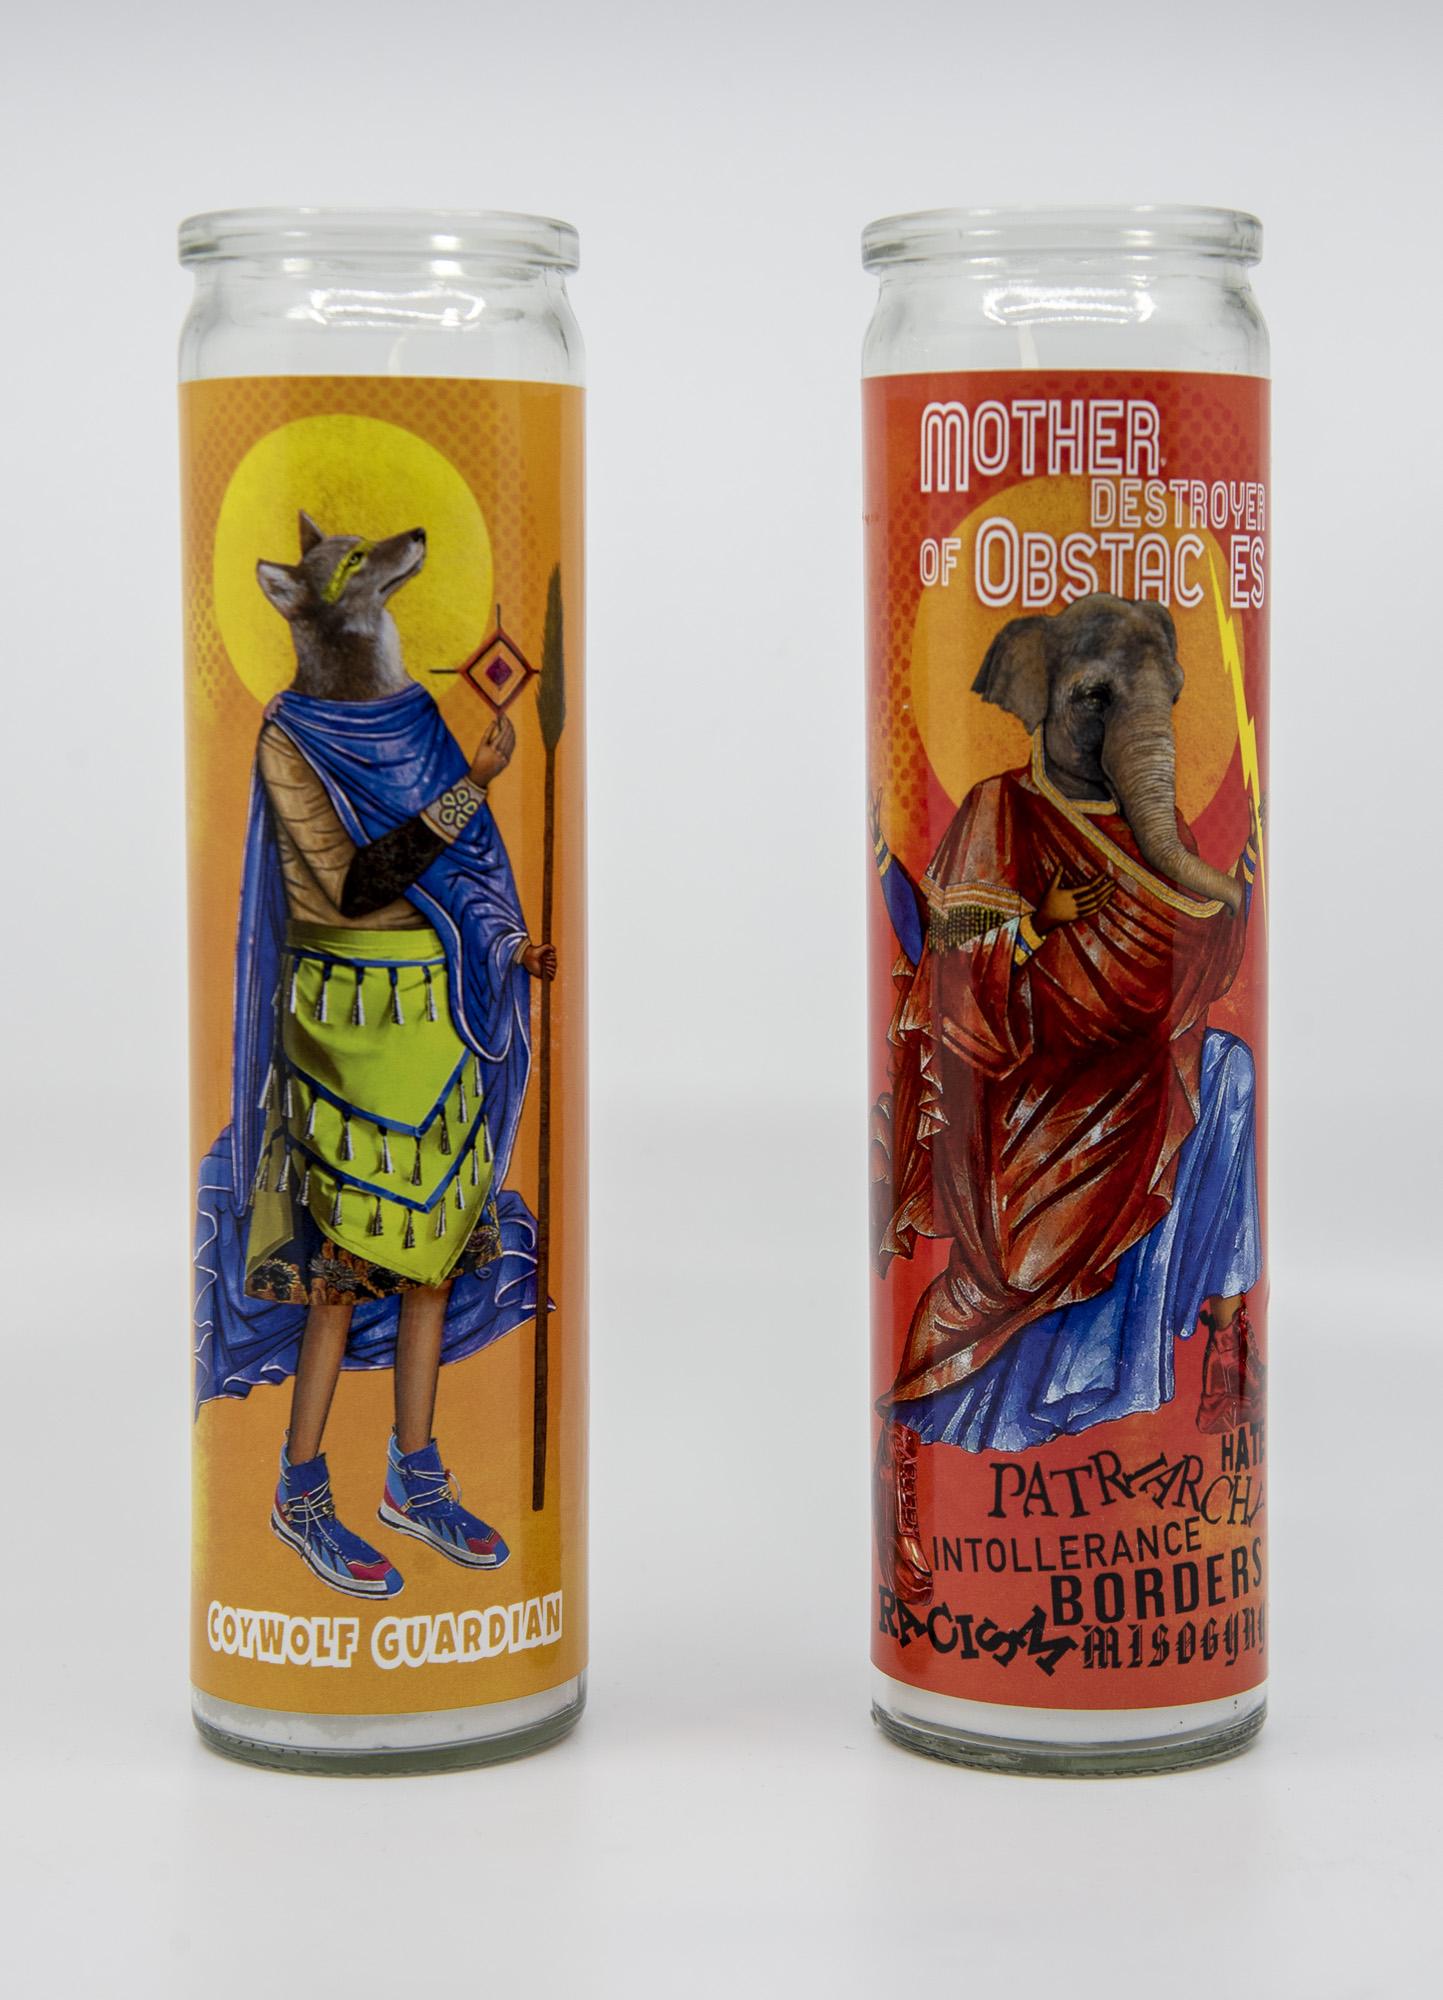 Mother Destroyer of Obstacles & Coywolf Guardian (candles)